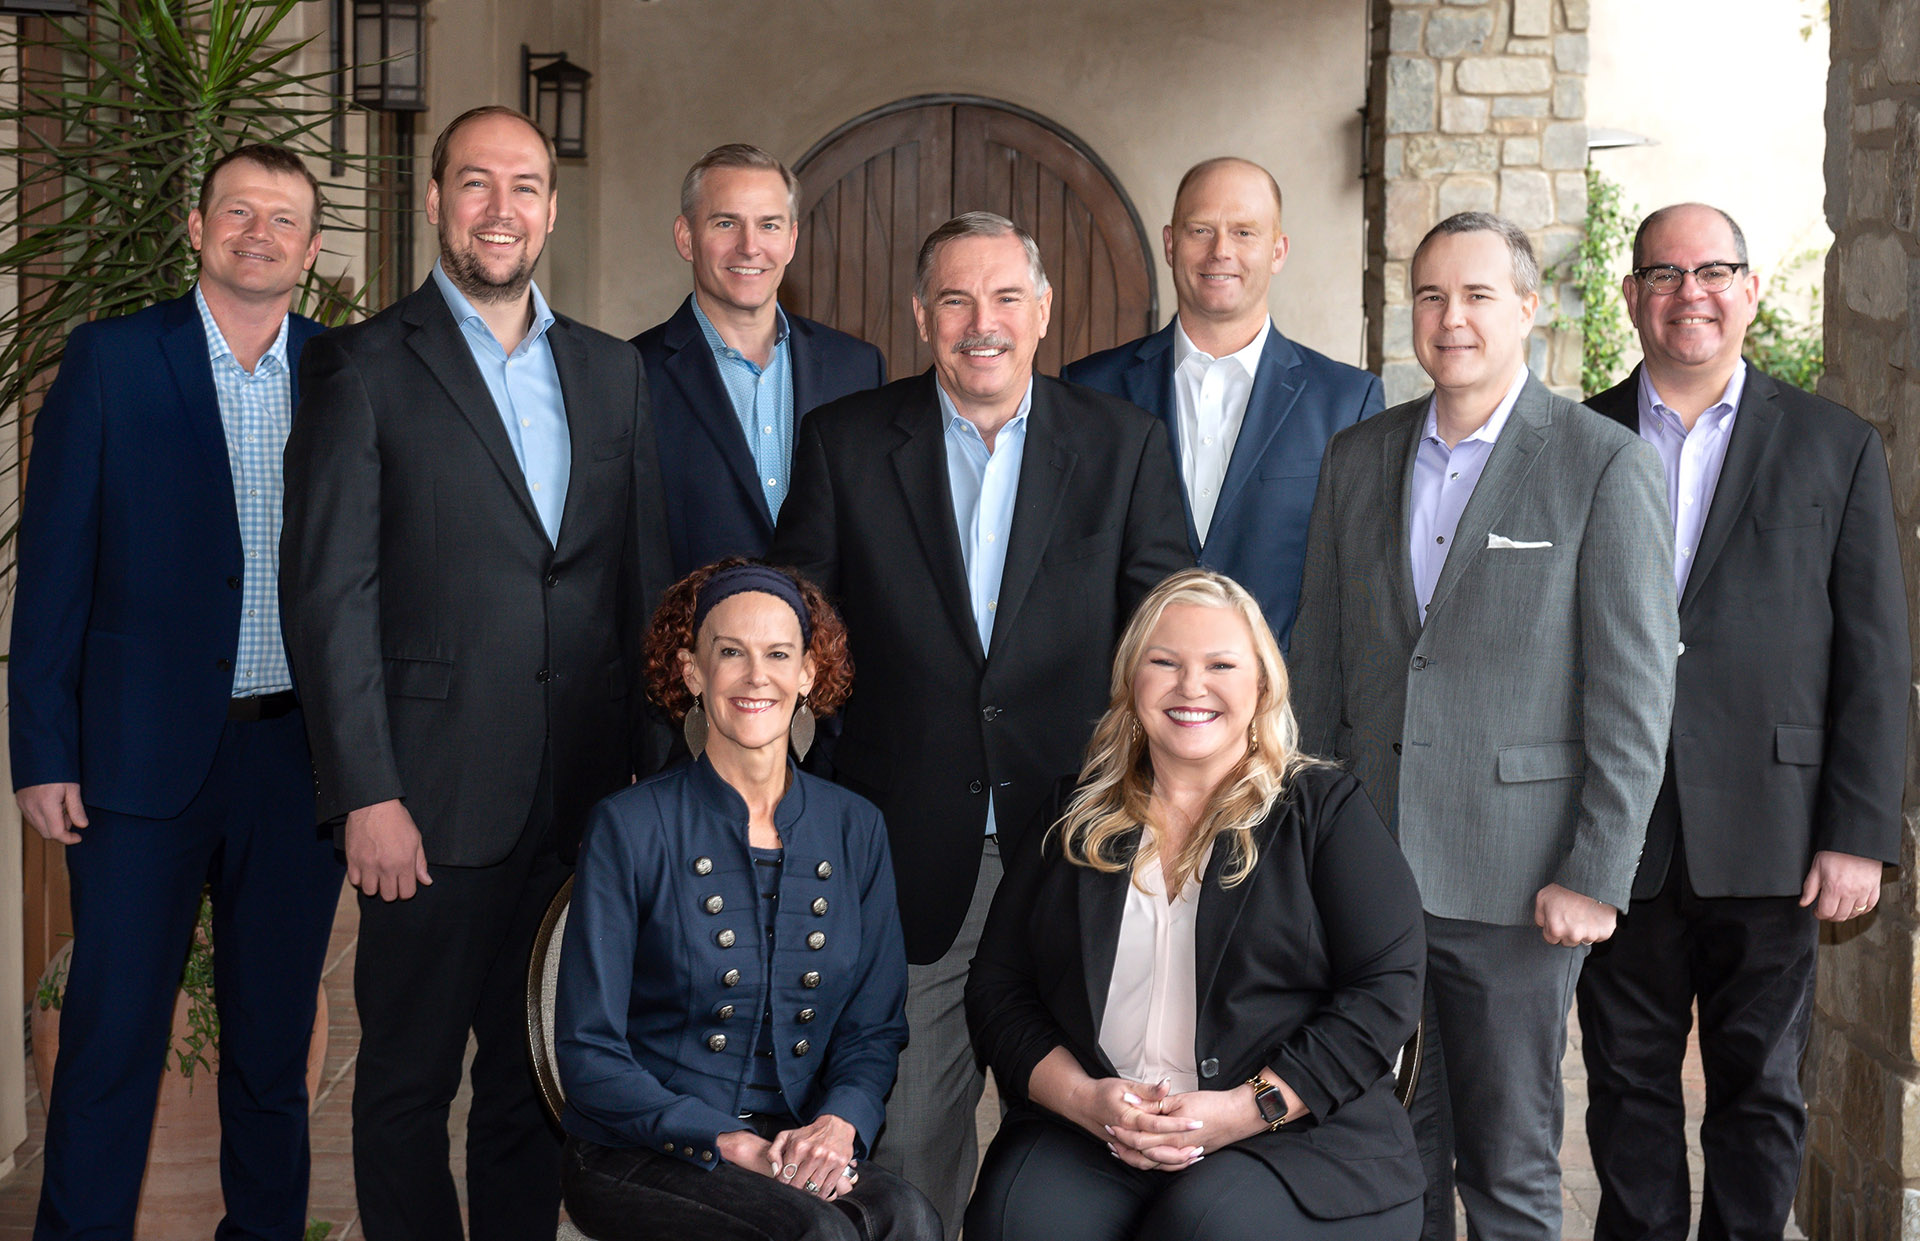 T3 Sixty Partners -  (Top row from left) Travis Saxton, Tinus Swanepoel, Dean Cottrill, Stefan Swanepoel, Paul Hagey, Jack Miller, Mitch Robinson, (Bottom row from left) Kelly White, Darlene Lyons.